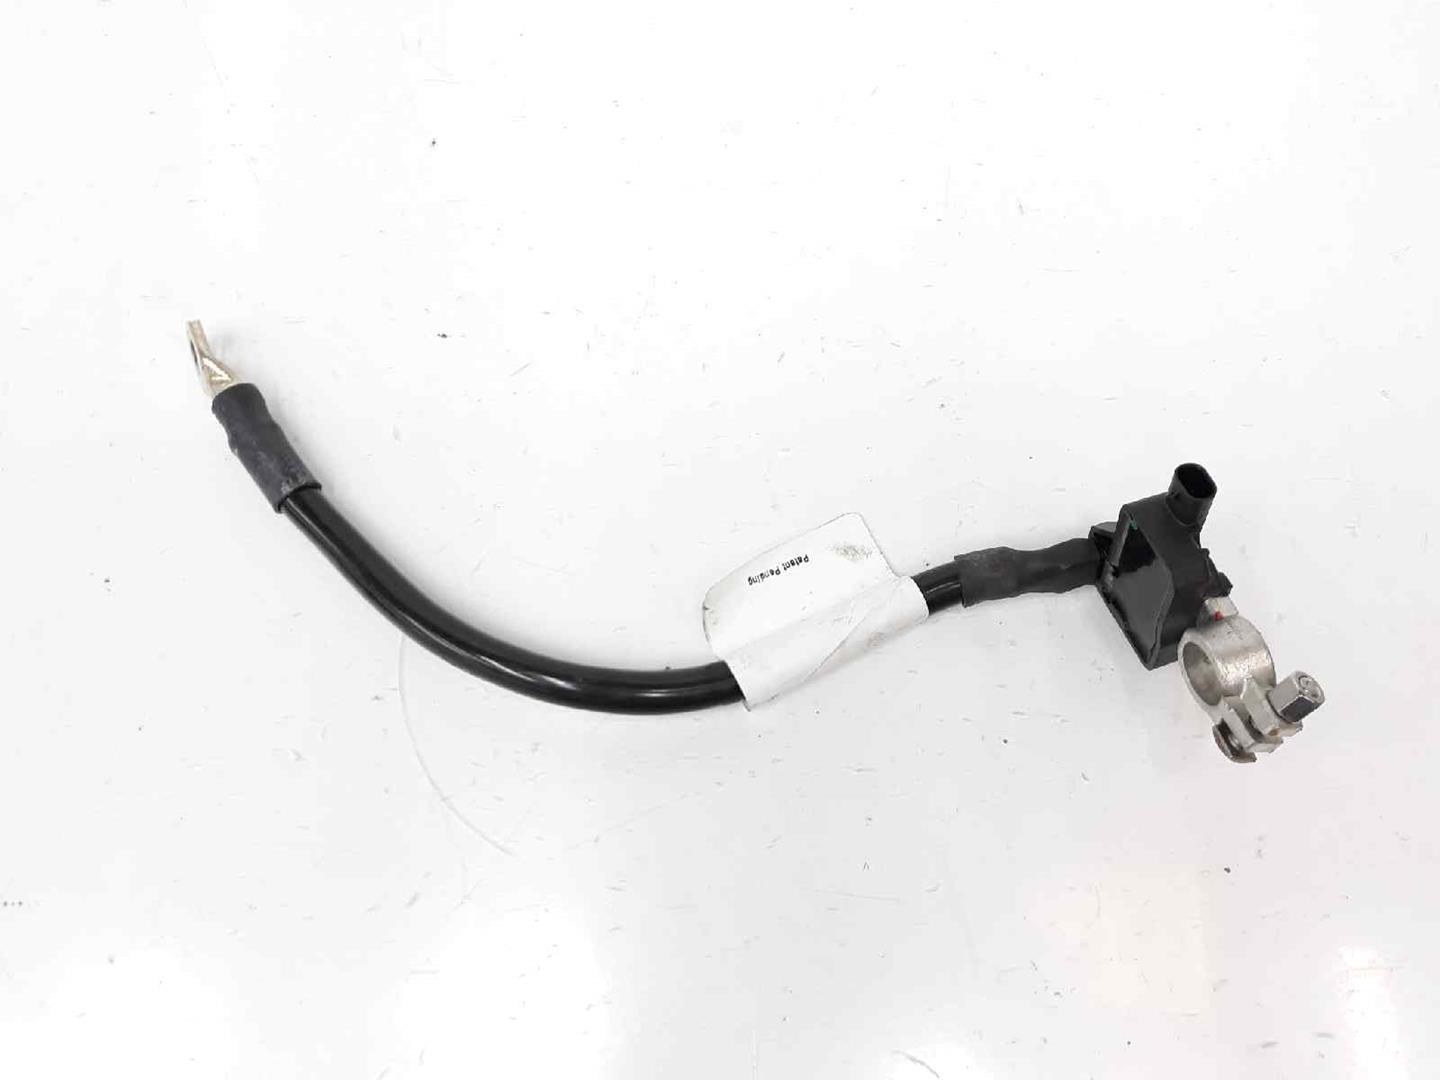 AUDI A7 C7/4G (2010-2020) Cable Harness 8X0915181, 8X0915181 19686459